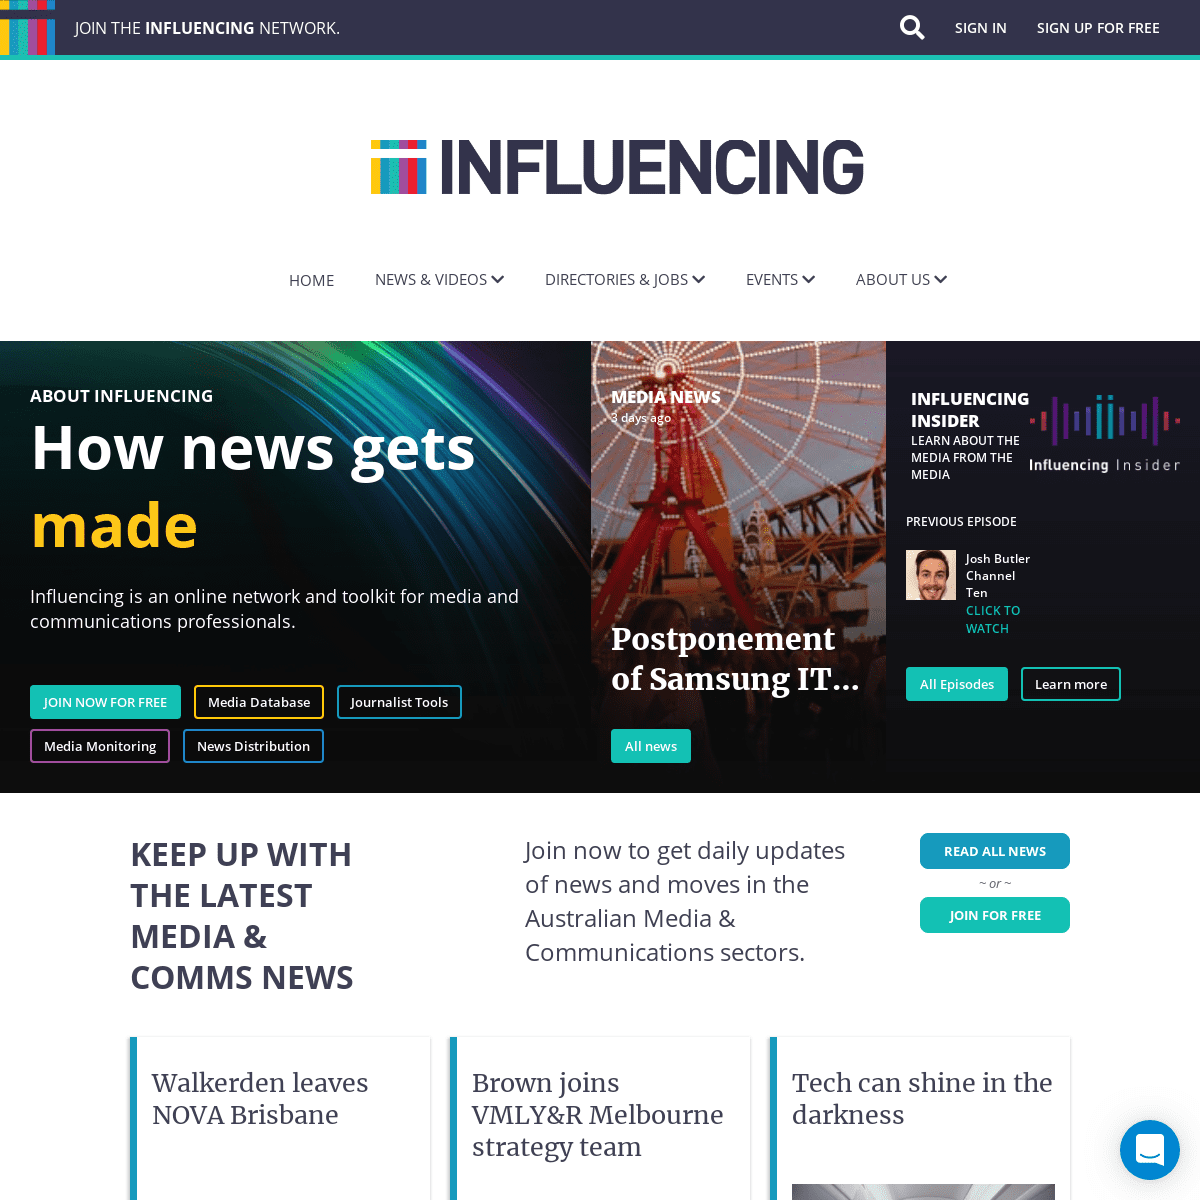 A complete backup of influencing.com